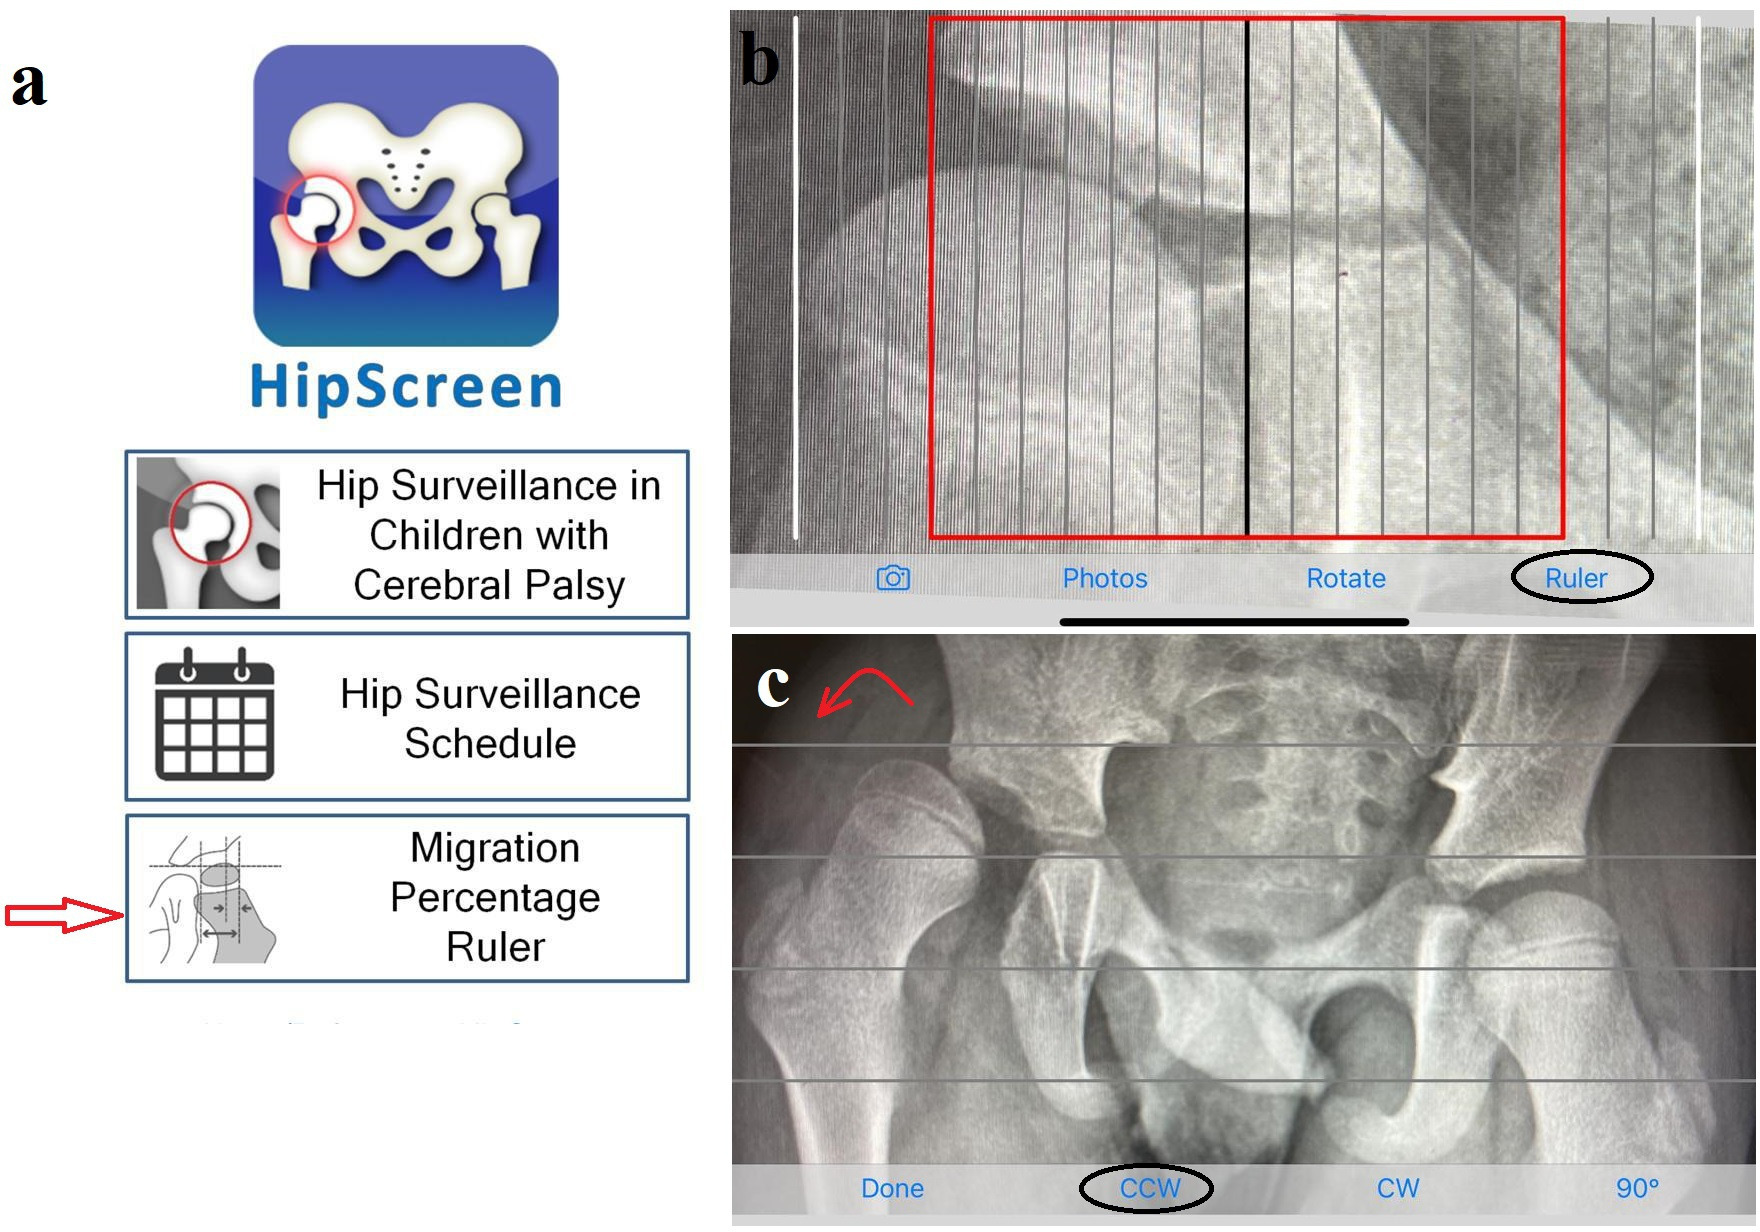 Fig. 2 
          a) Home screen of the HipScreen app, with red arrow pointing to the ruler function. b) Ruler with the red line indicating 30% migration percentage. c) Rotate function to correct pelvic obliquity; in this radiograph counter-clockwise (CCW) is needed (red curved arrow). CW, clockwise.
        